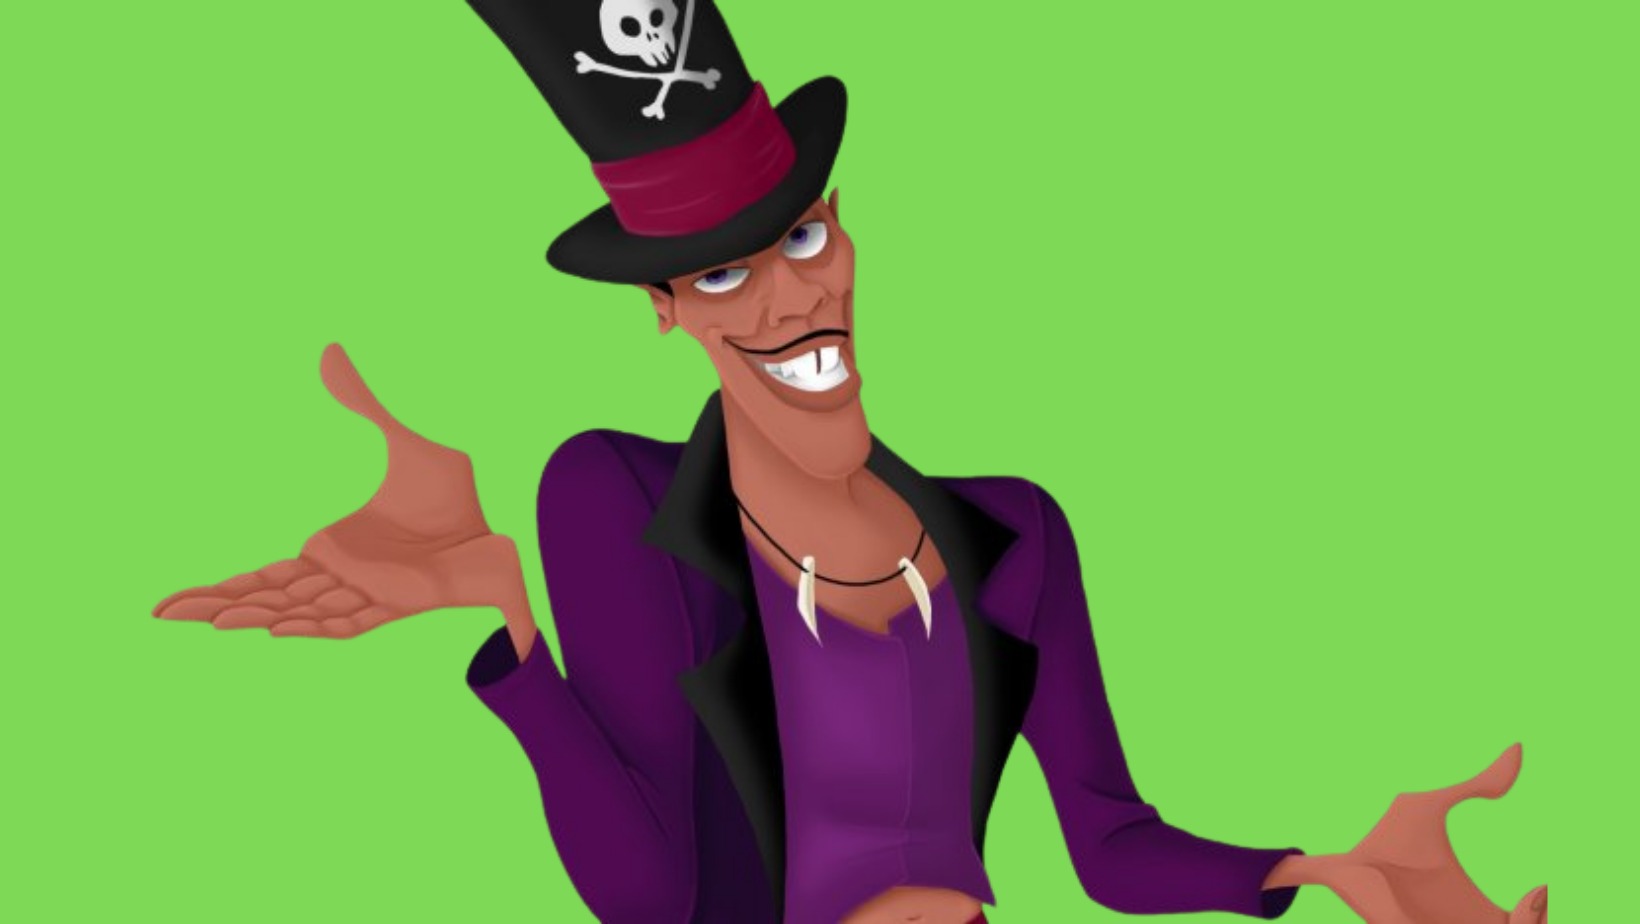 Dr. Facilier from The Princess and the Frog - wide 4